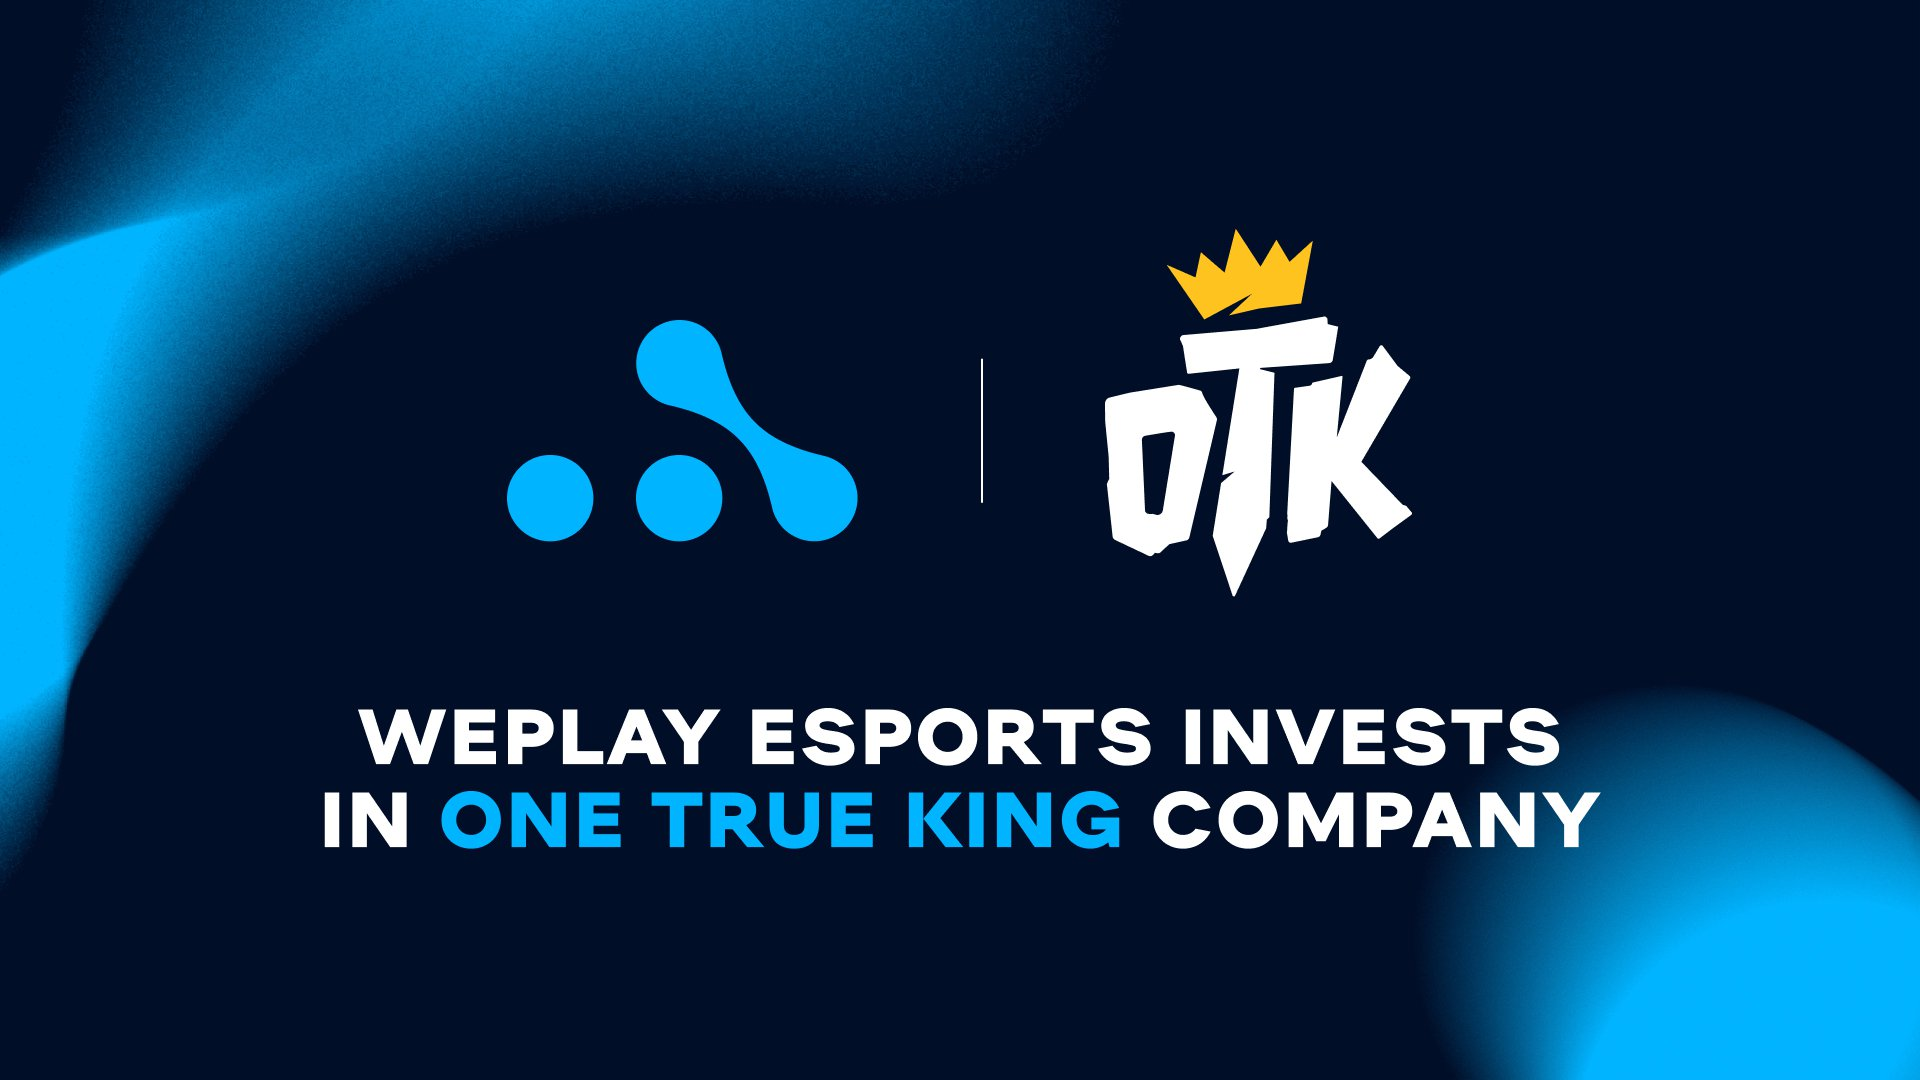 WePlay Esports invests in One True King